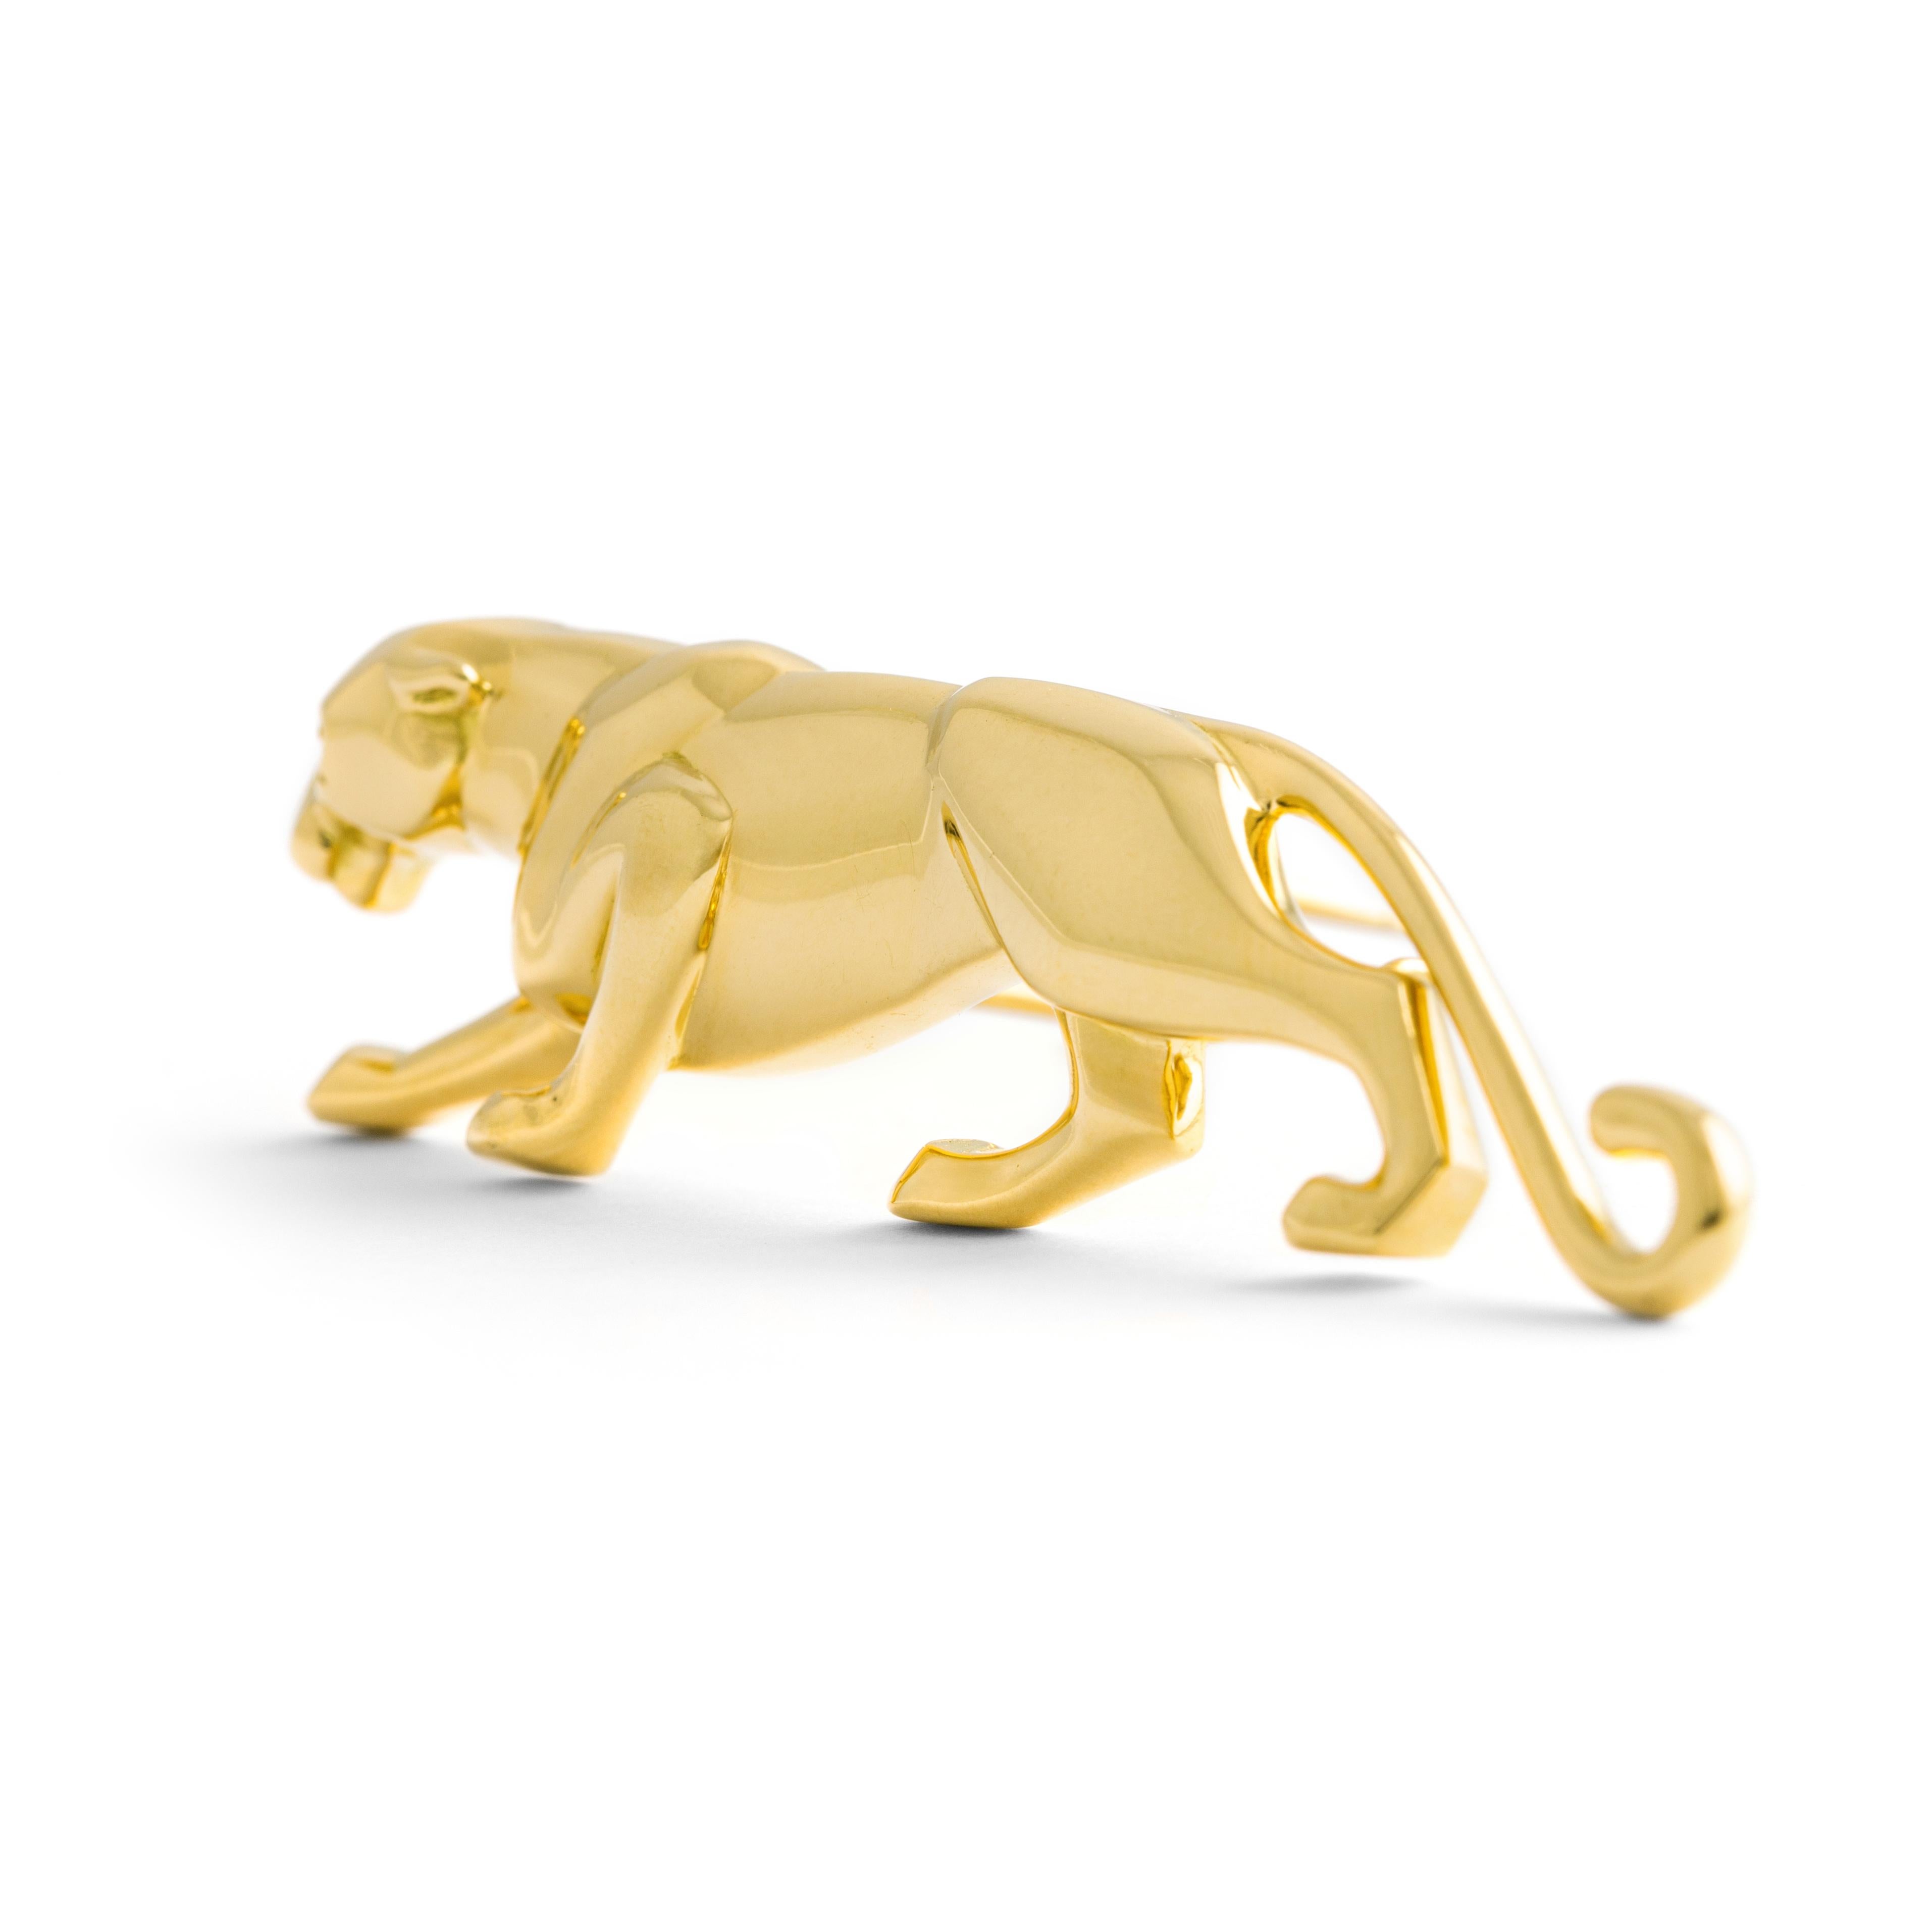 Cartier Panther yellow gold 18K brooch.

This Cartier Panther brooch is crafted in 18K yellow gold, featuring an emerald eye that adds a touch of vivid elegance. The piece is signed Cartier, numbered, and marked, ensuring its authenticity and